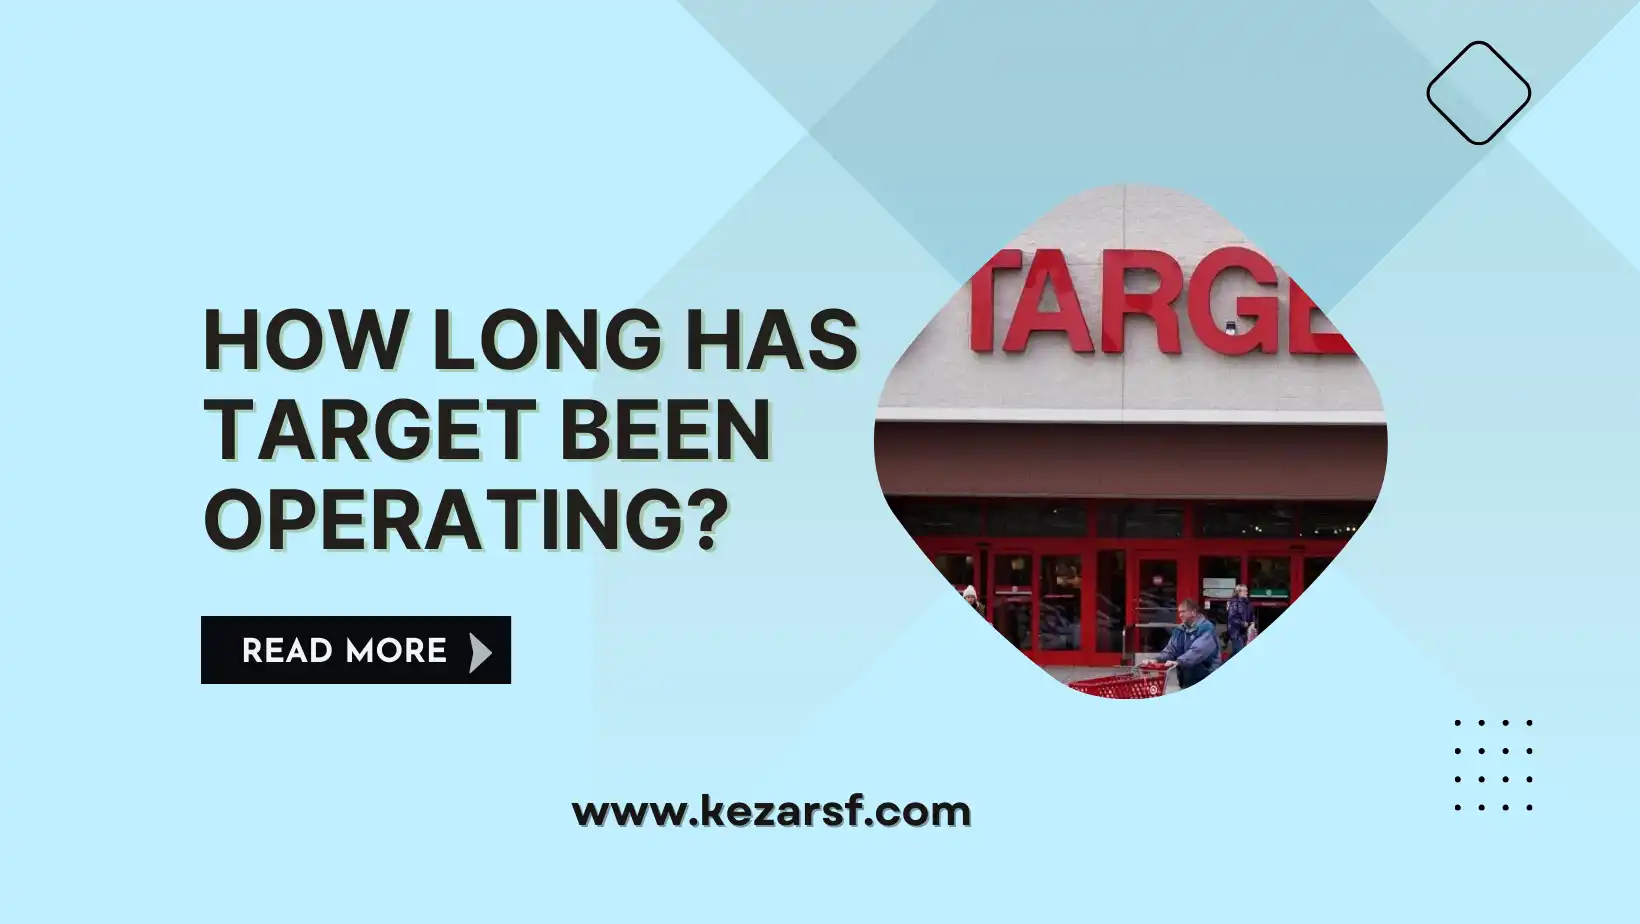 How Long Has Target Been Operating?